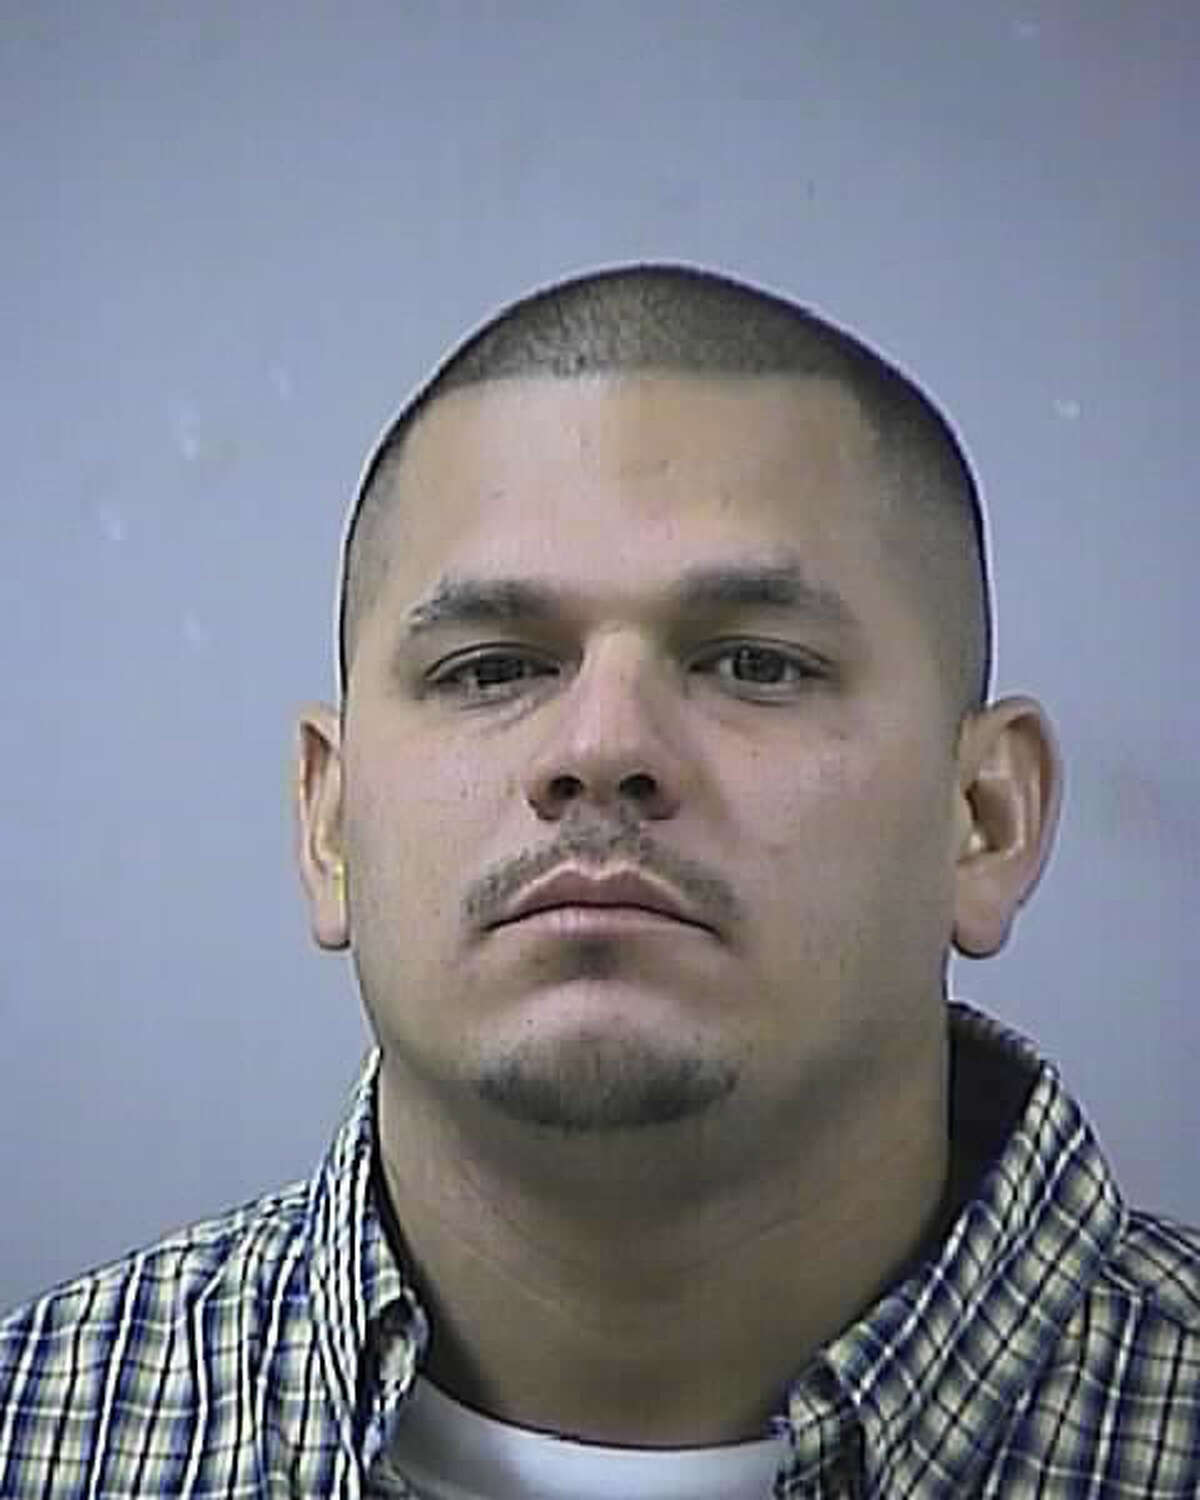 Francisco Soto, 31, is accused of fatally shooting a man outside of a North Side bar last week.